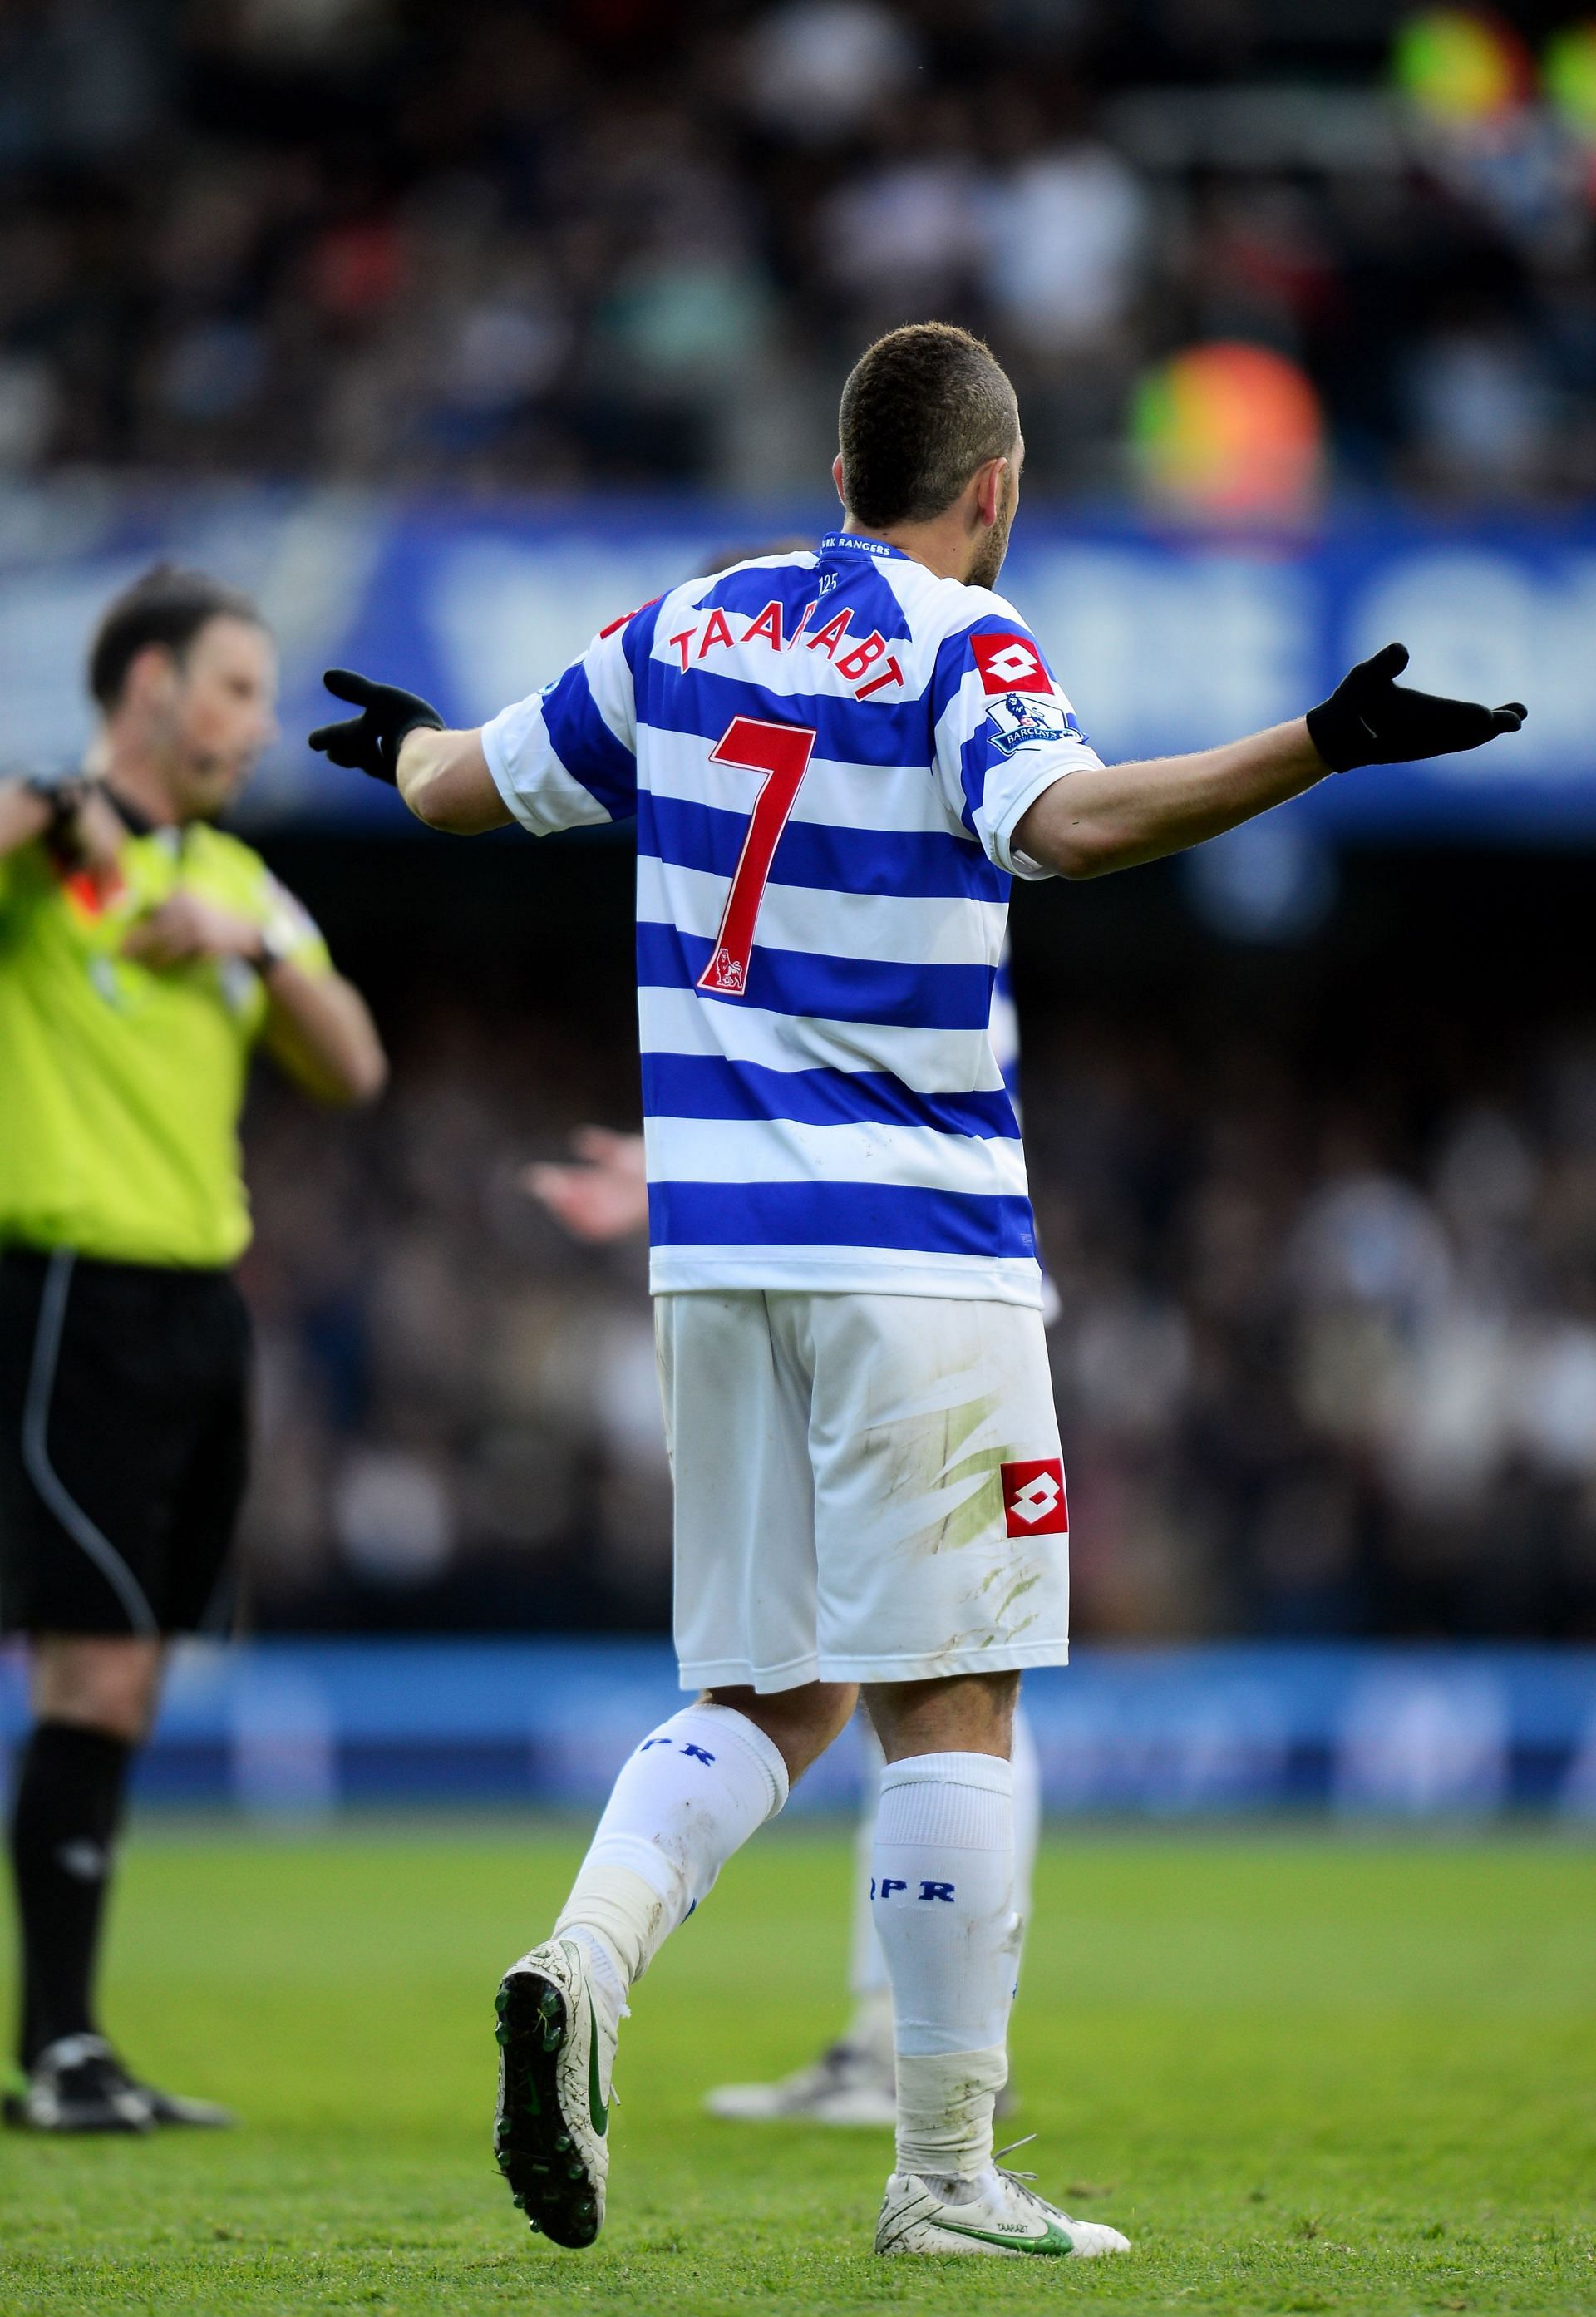 Adel Taarabt of QPR reacts after being shown the red card by Referee Mark Clattenburg for his second bookable offense during the Barclays Premier League match between Queens Park Rangers and Tottenham Hotspur at Loftus Road on April 21, 2012.